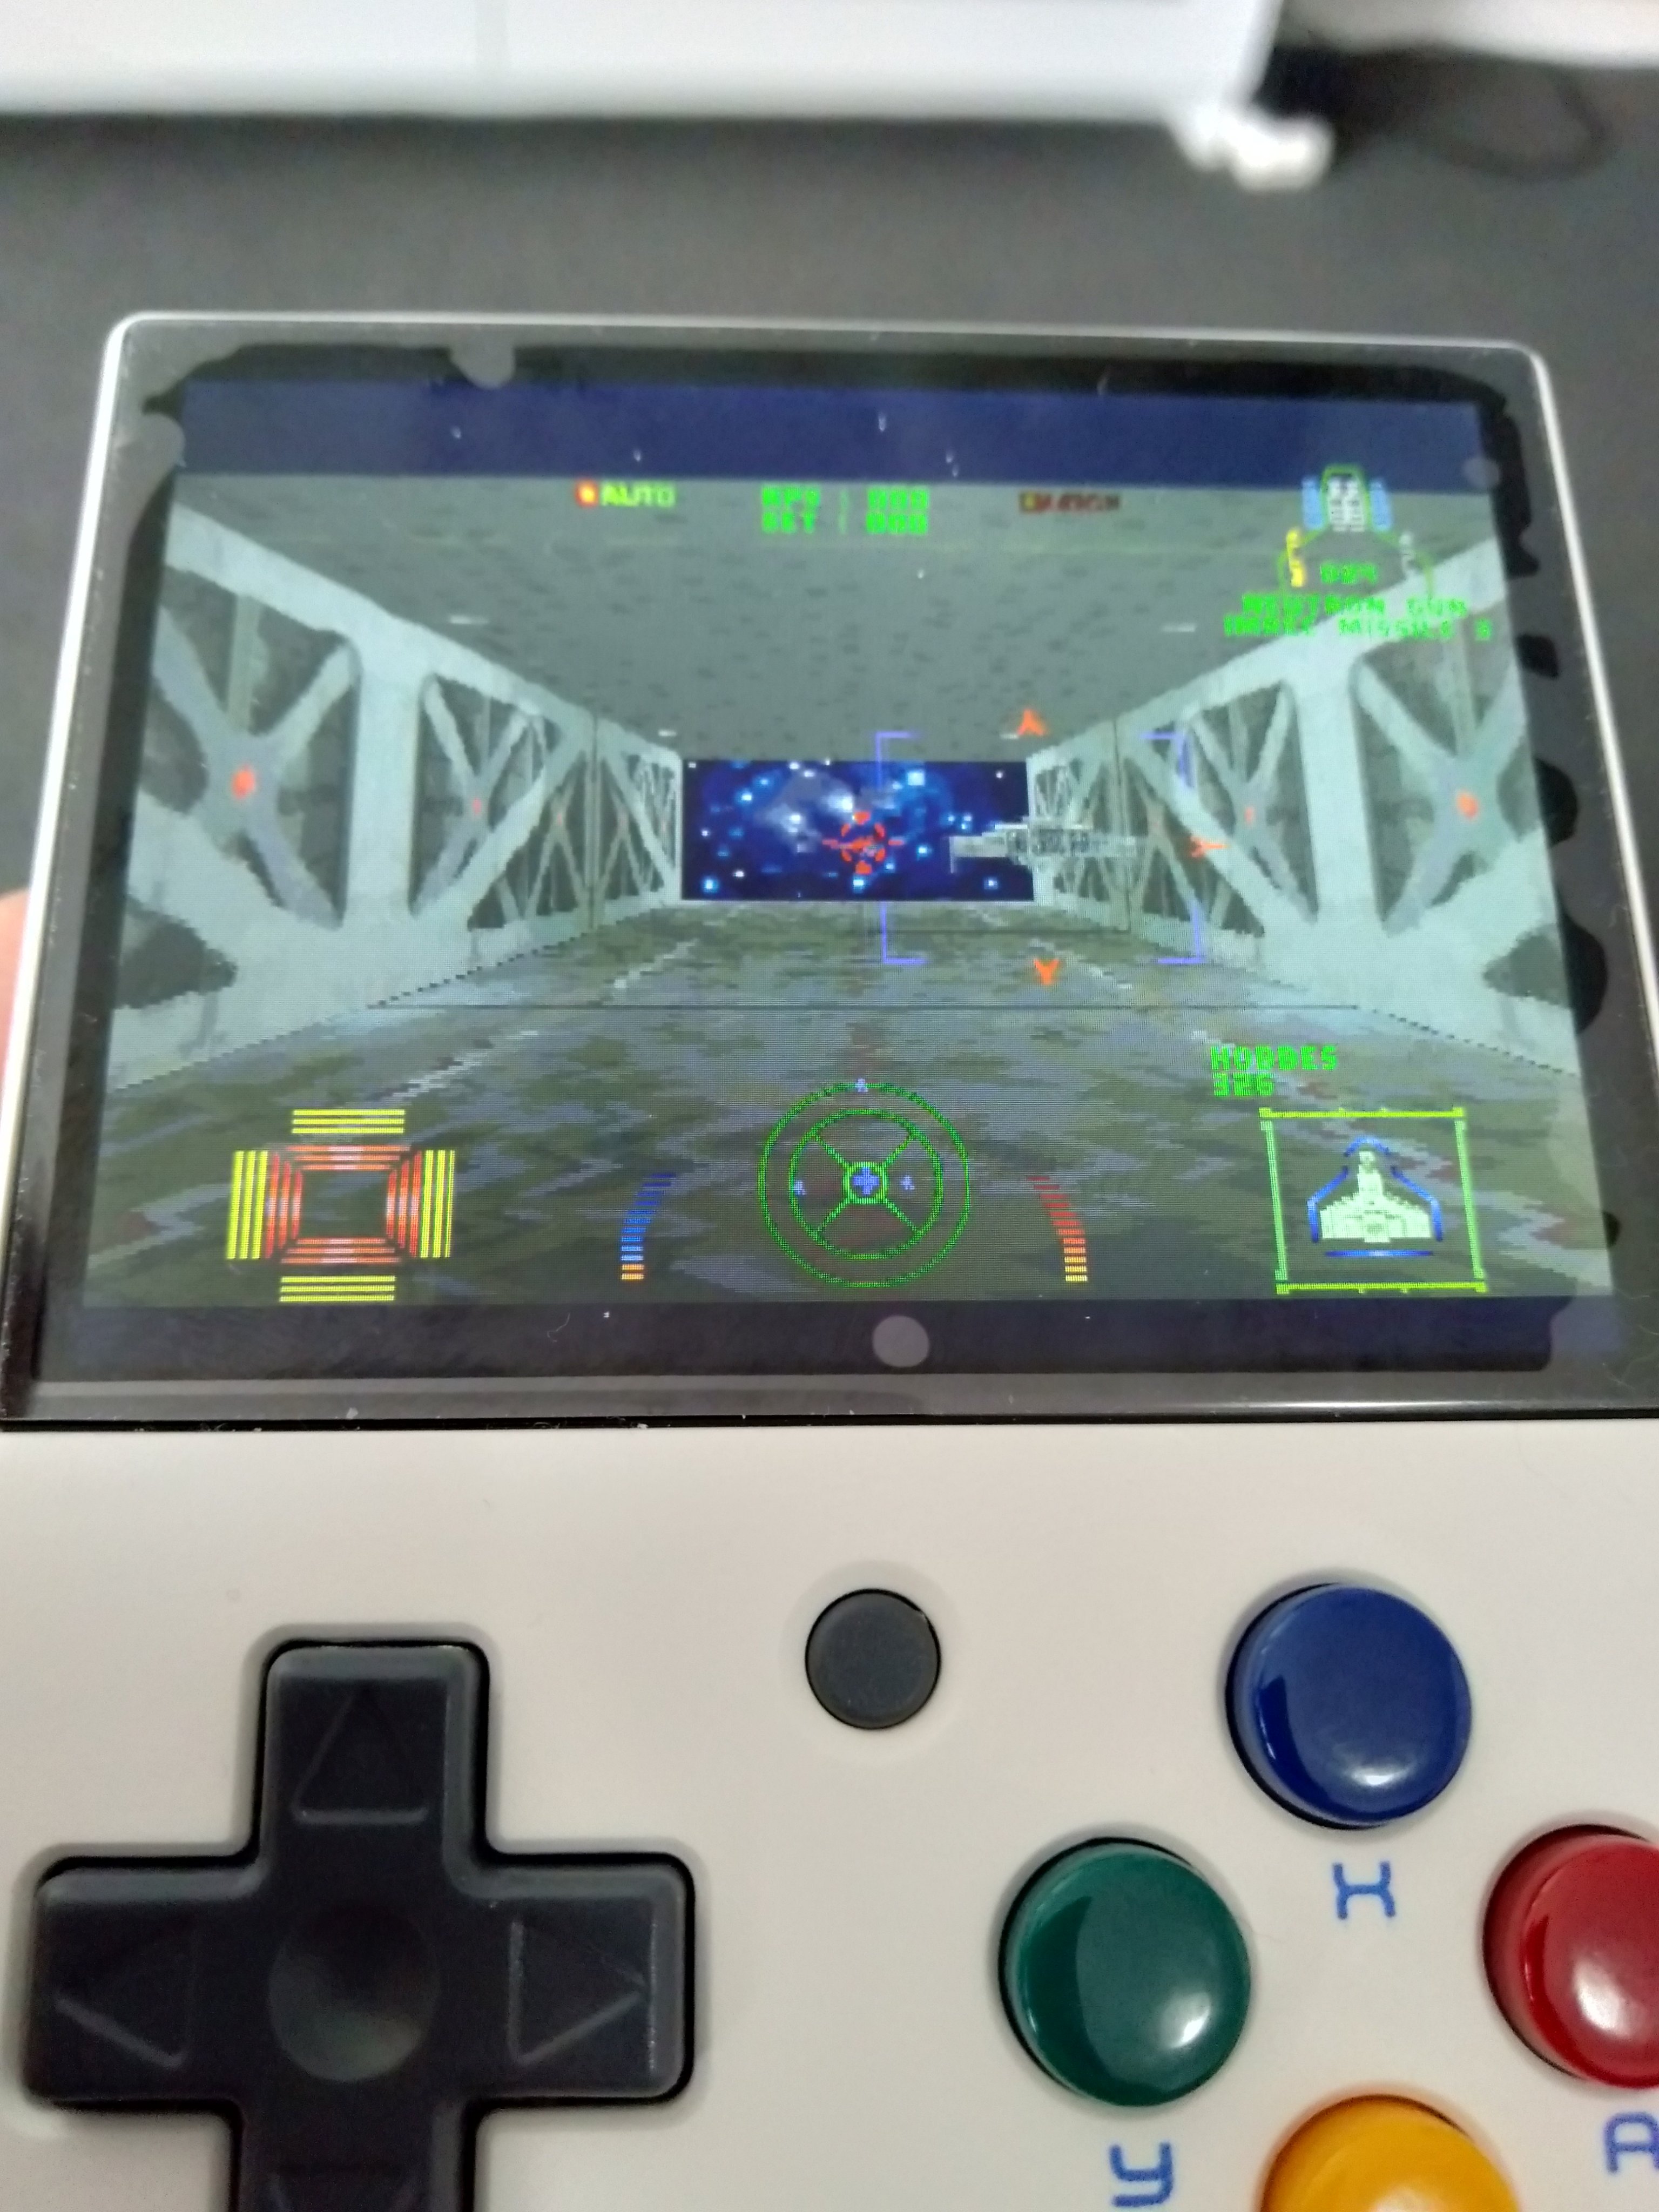 How To Play Online Nintendo DS Games With an Emulator - iCharts